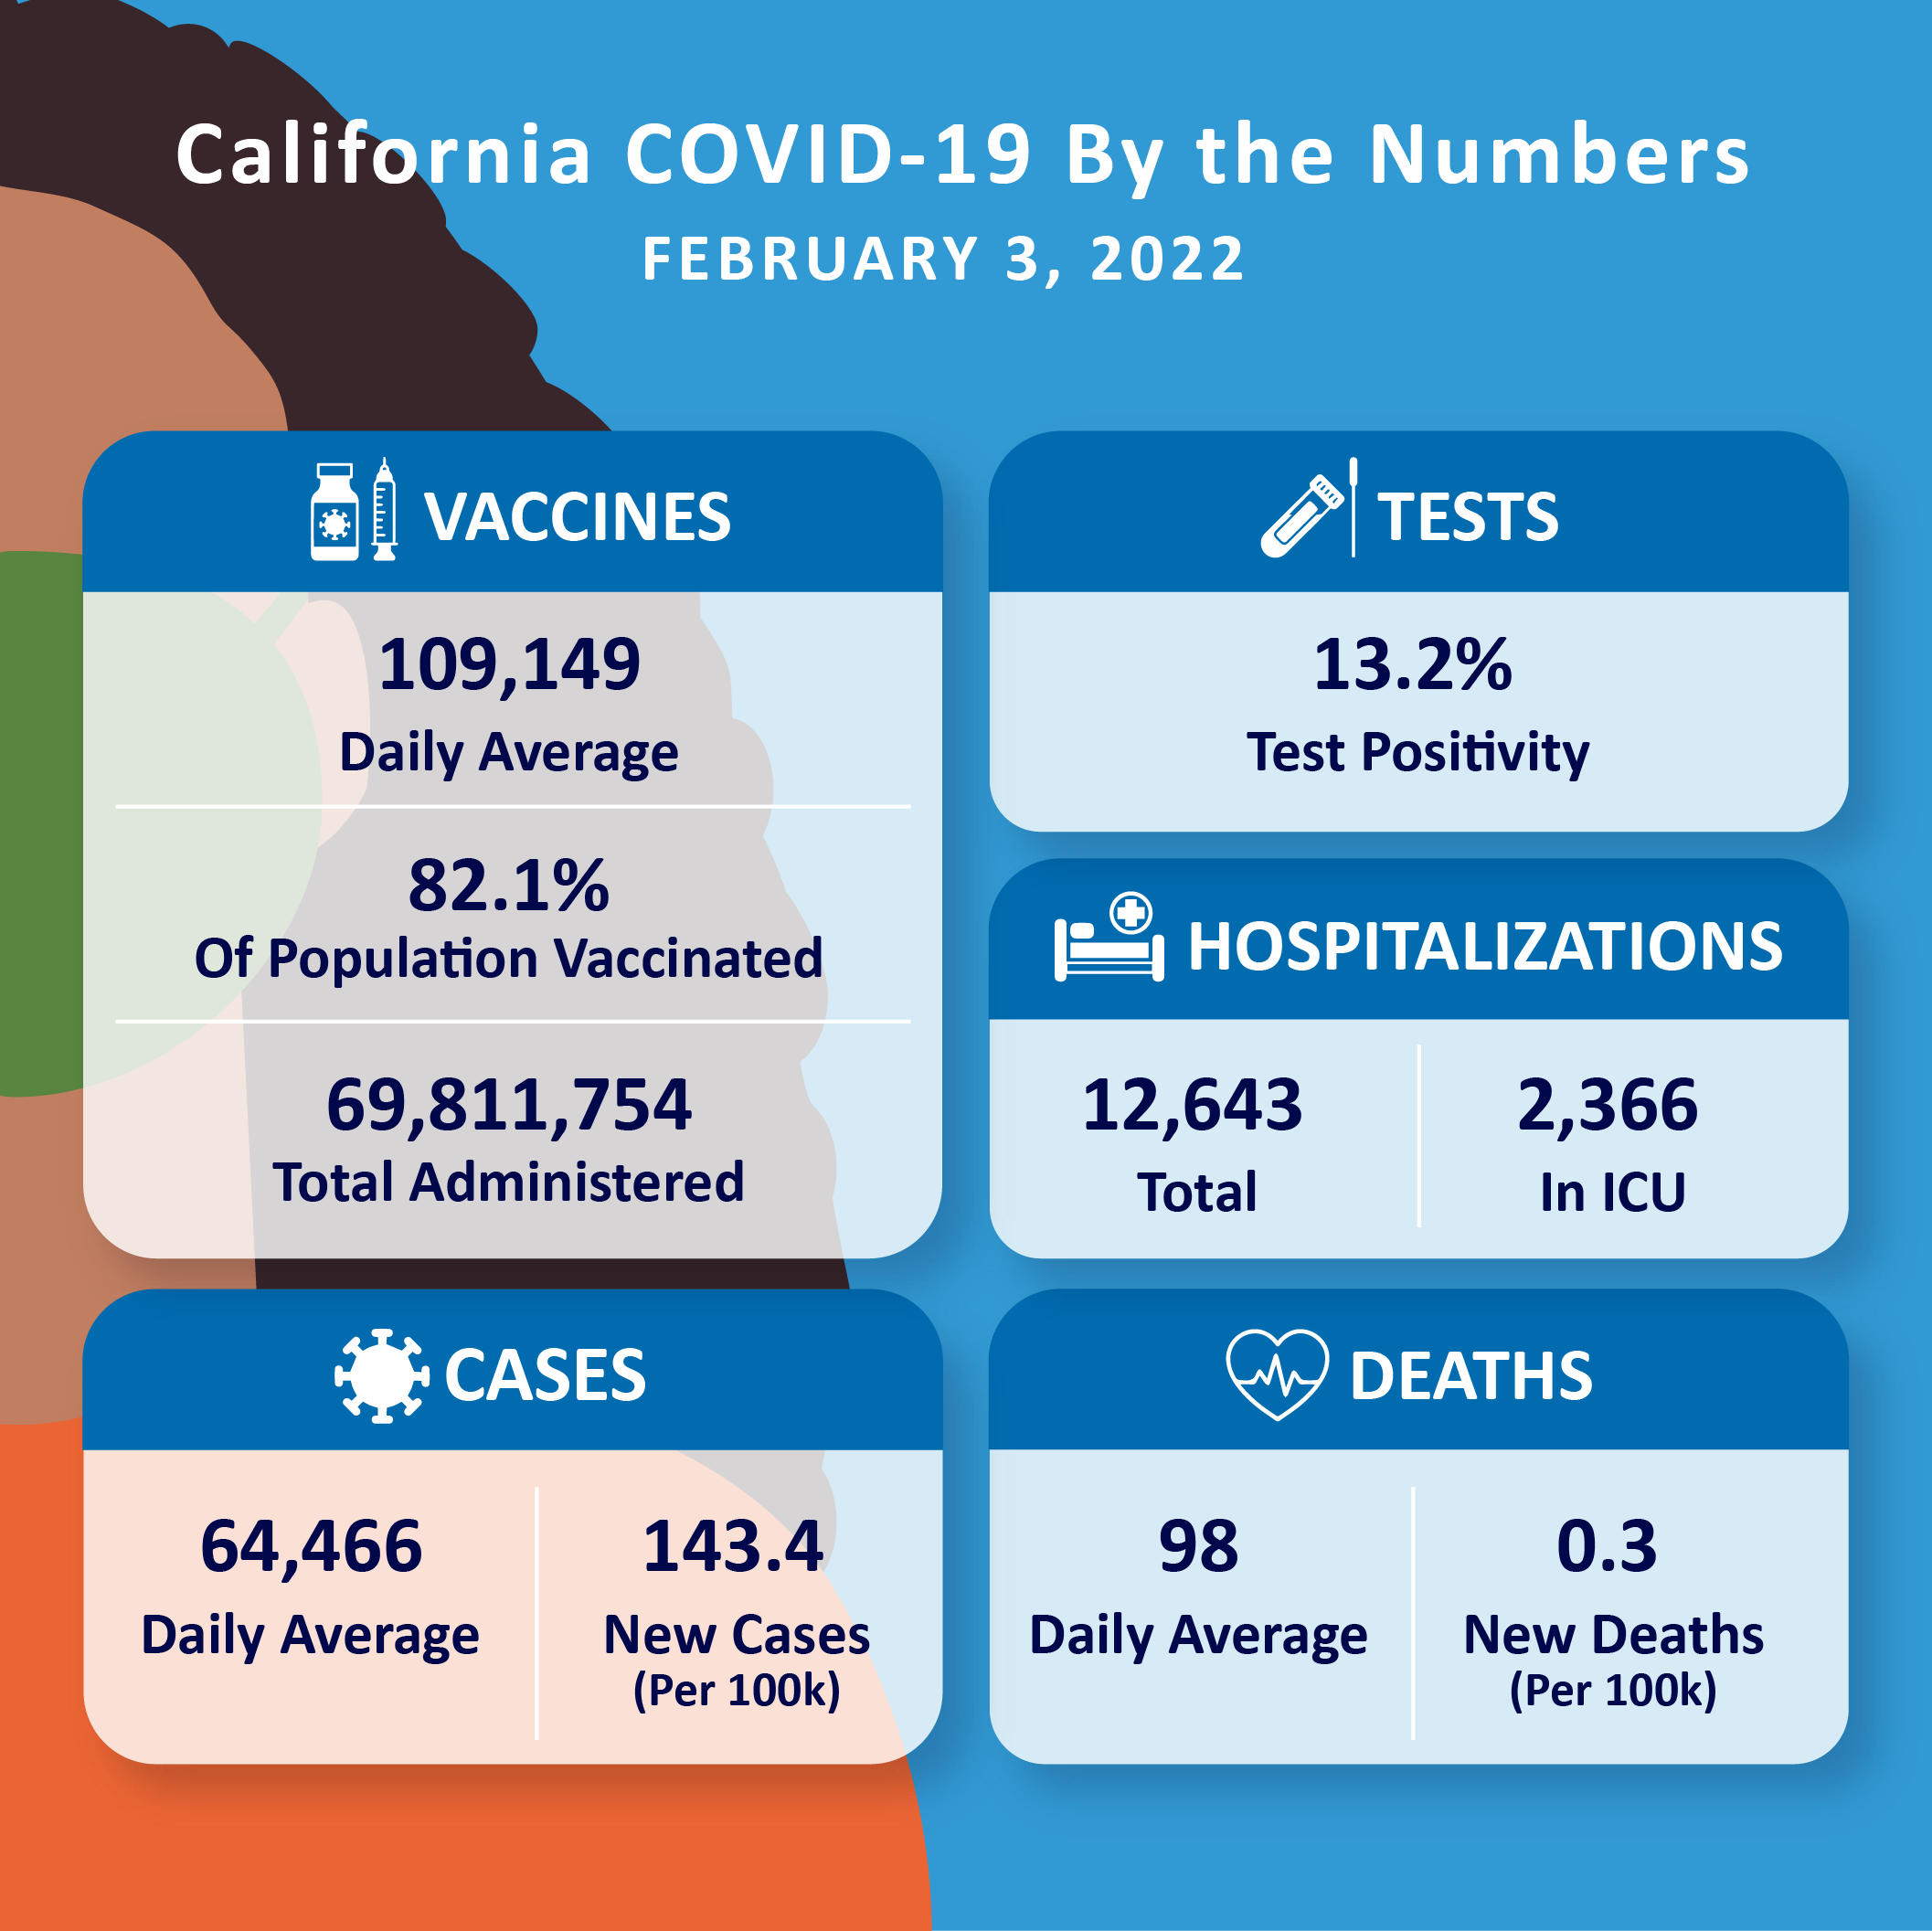 CA COVID-19 By the Numbers 2/3/2022